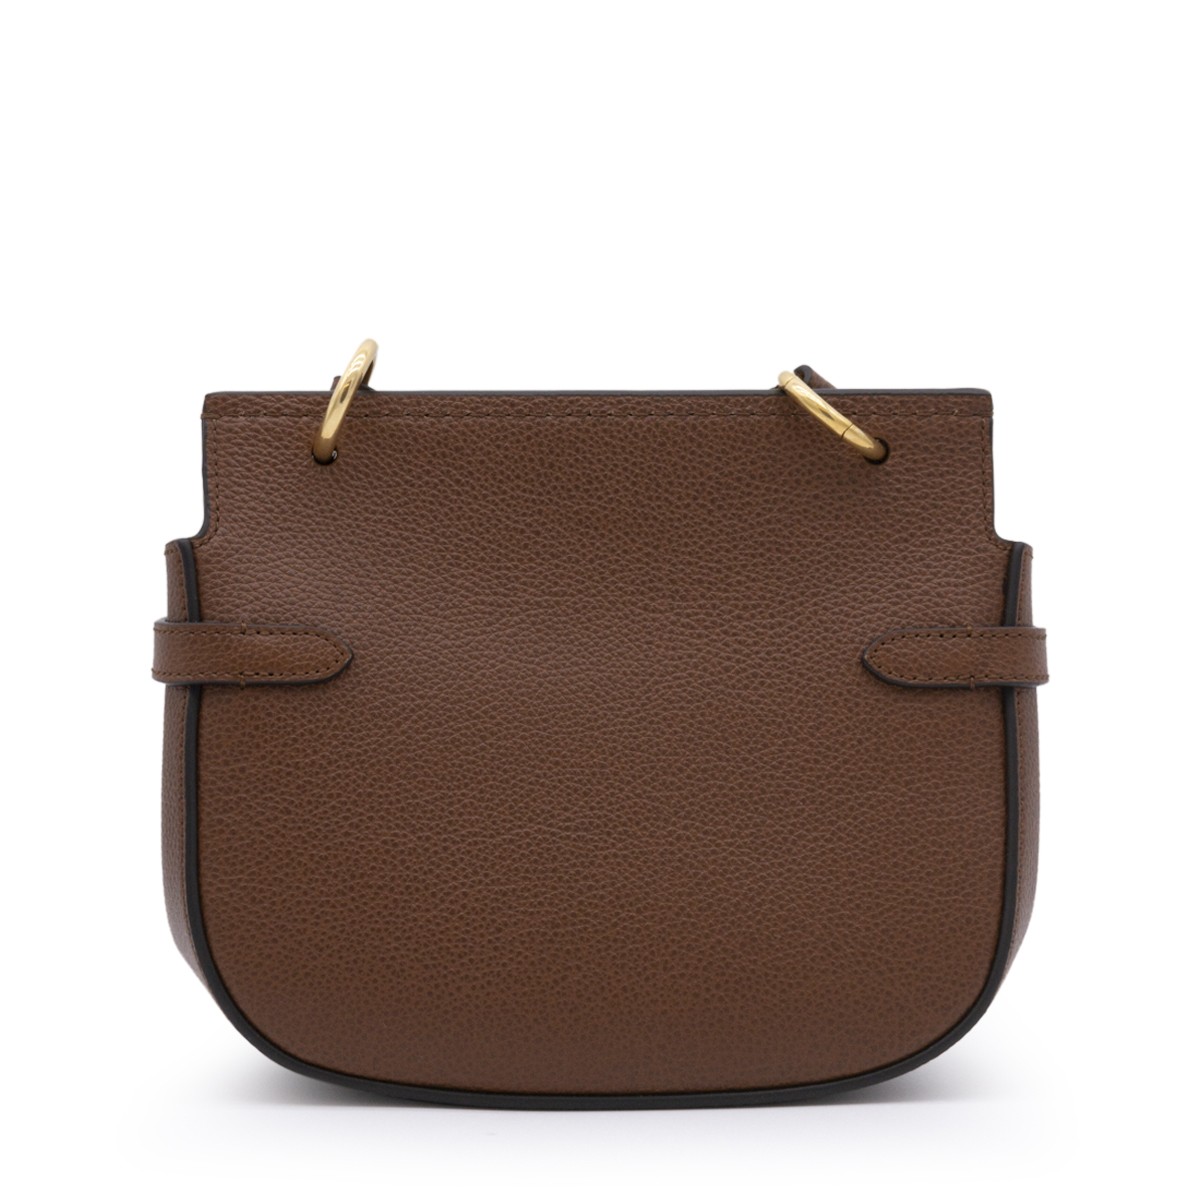 Stylish Mulberry Amberley Satchel for Fashion Lovers